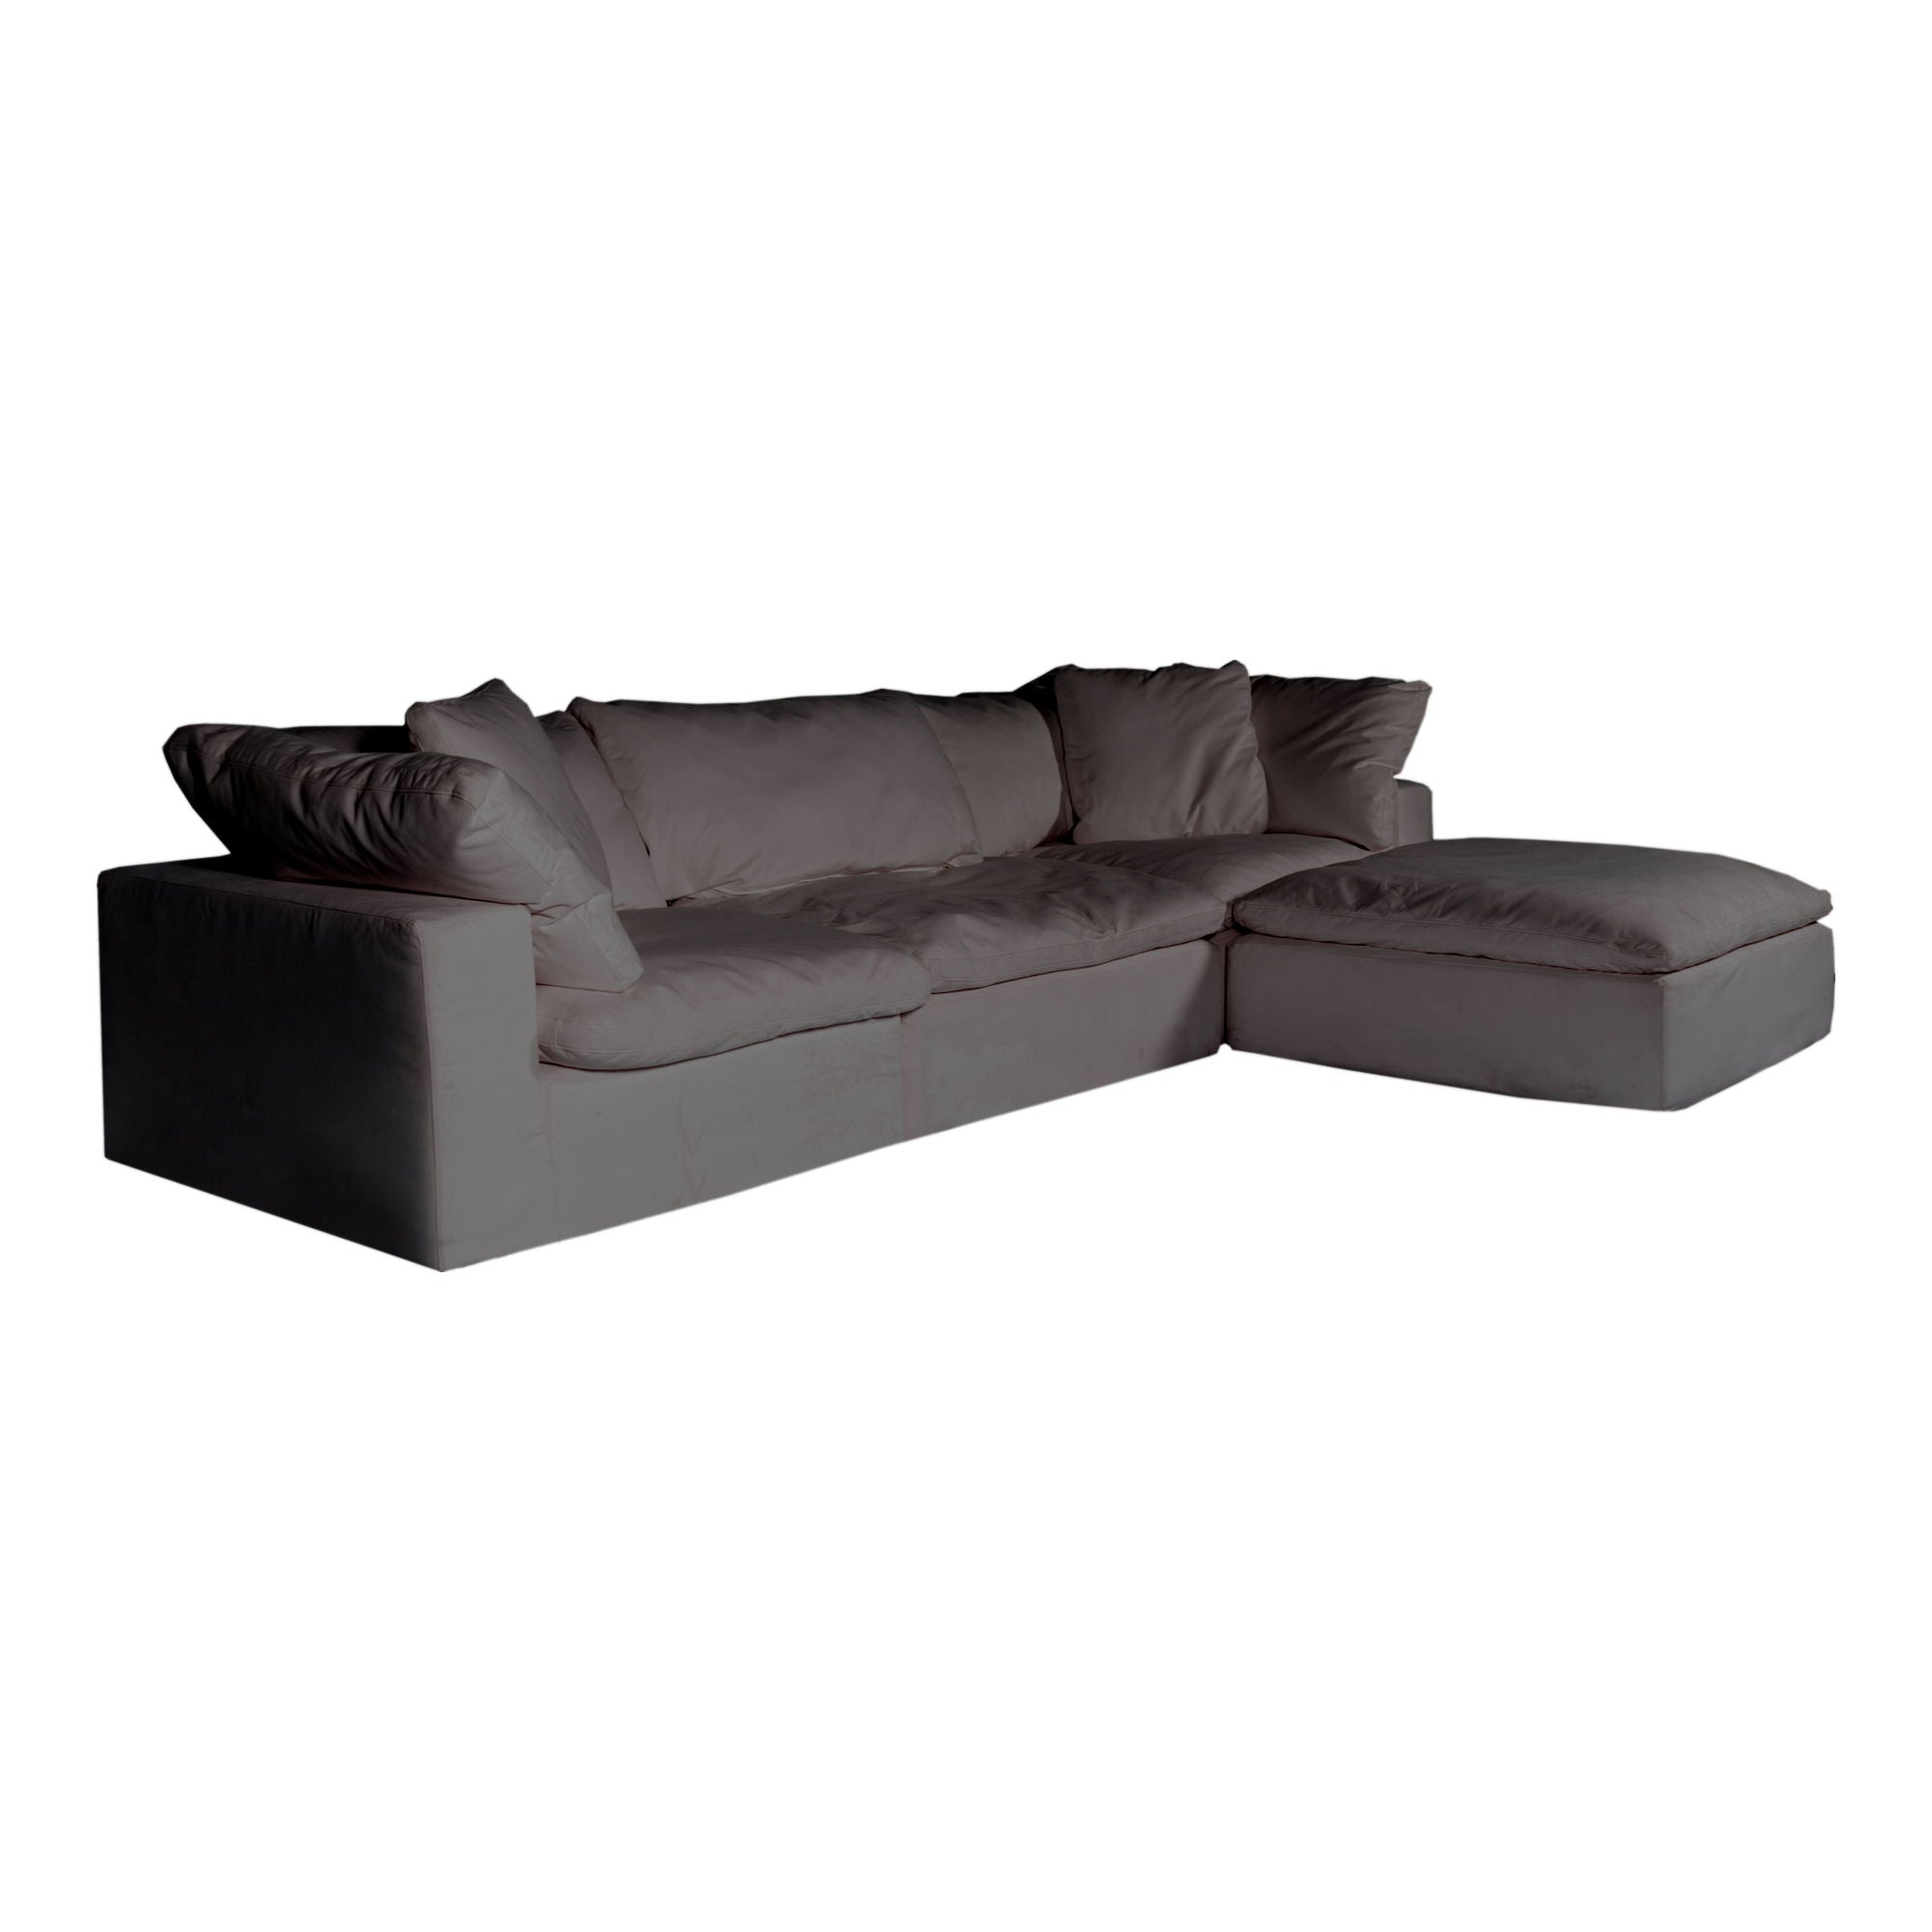 Clay - Lounge Modular Sectional Livesmart Fabric - Light Gray-Stationary Sectionals-American Furniture Outlet